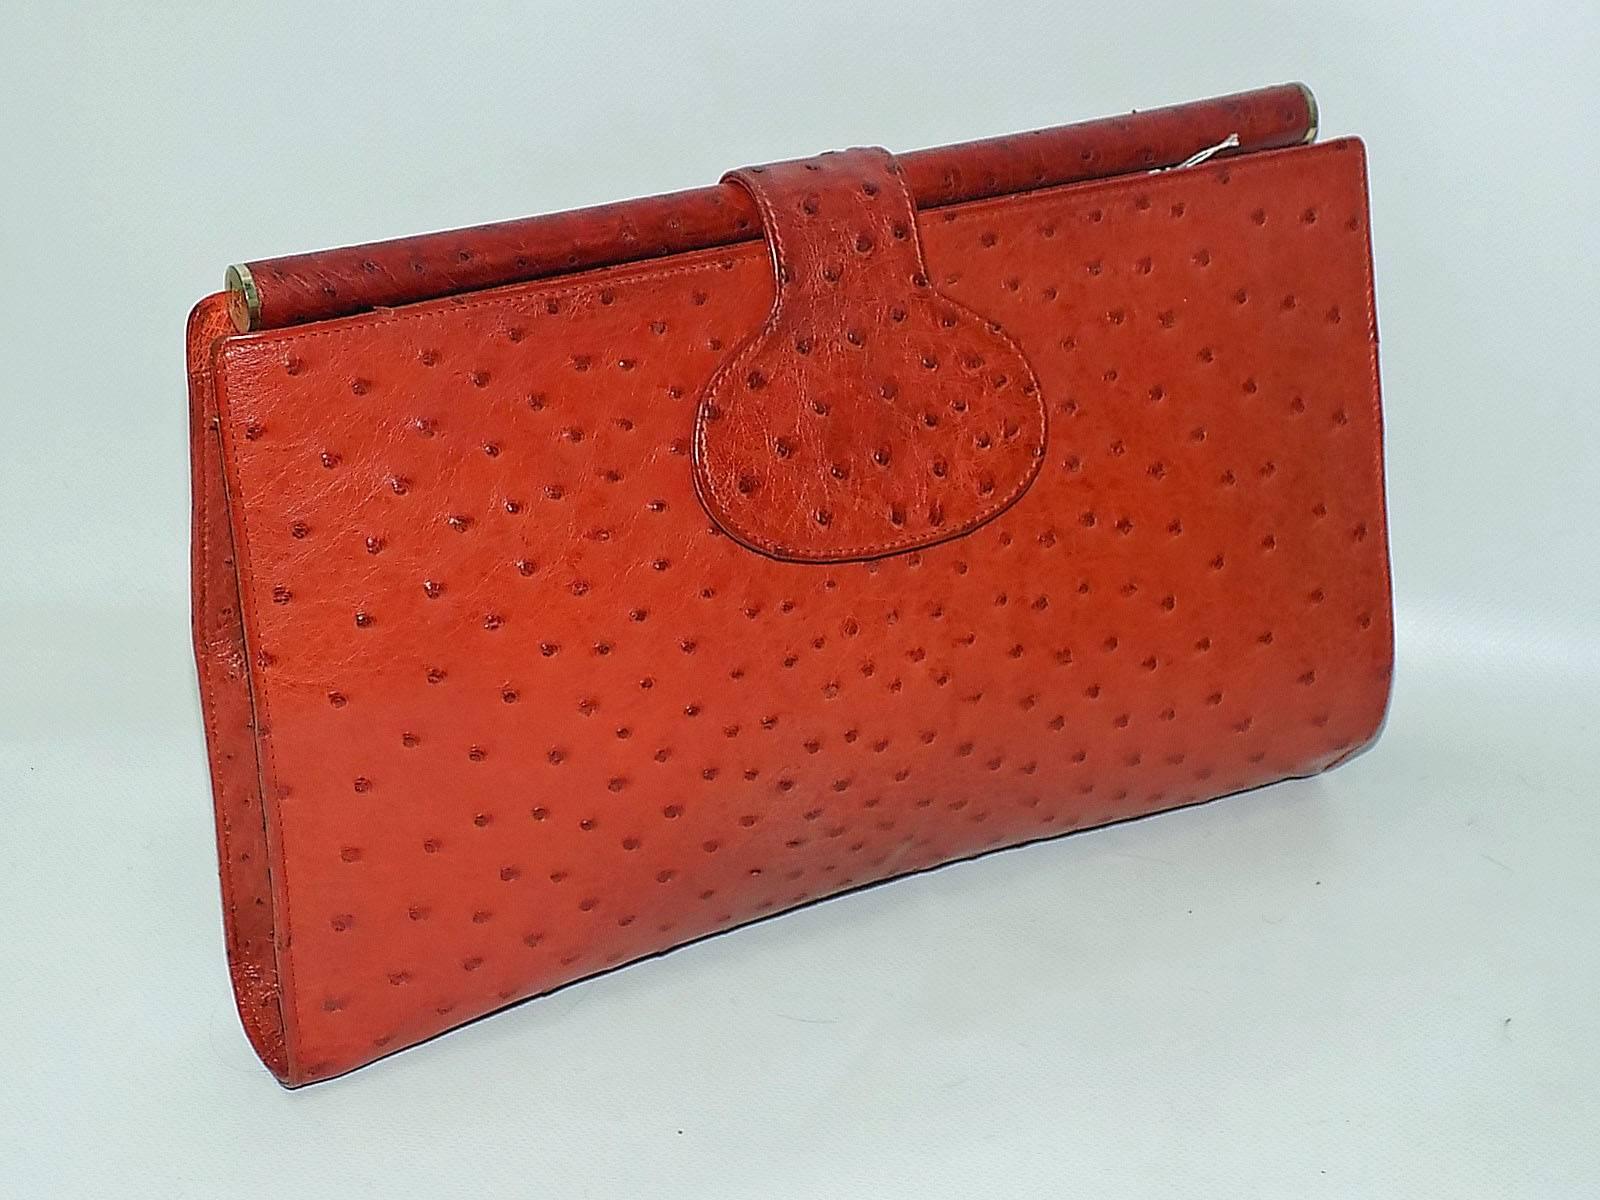 Rich cognac color genuine ostrich  Fendi Clutch bag.  Pristine condition. Like new! Hard round top frame with Fendi  engraved logo on the side,  Flip top snap closure. Ivory leather lining.  Two zip pockets  and one small pocket inside with  ostrich